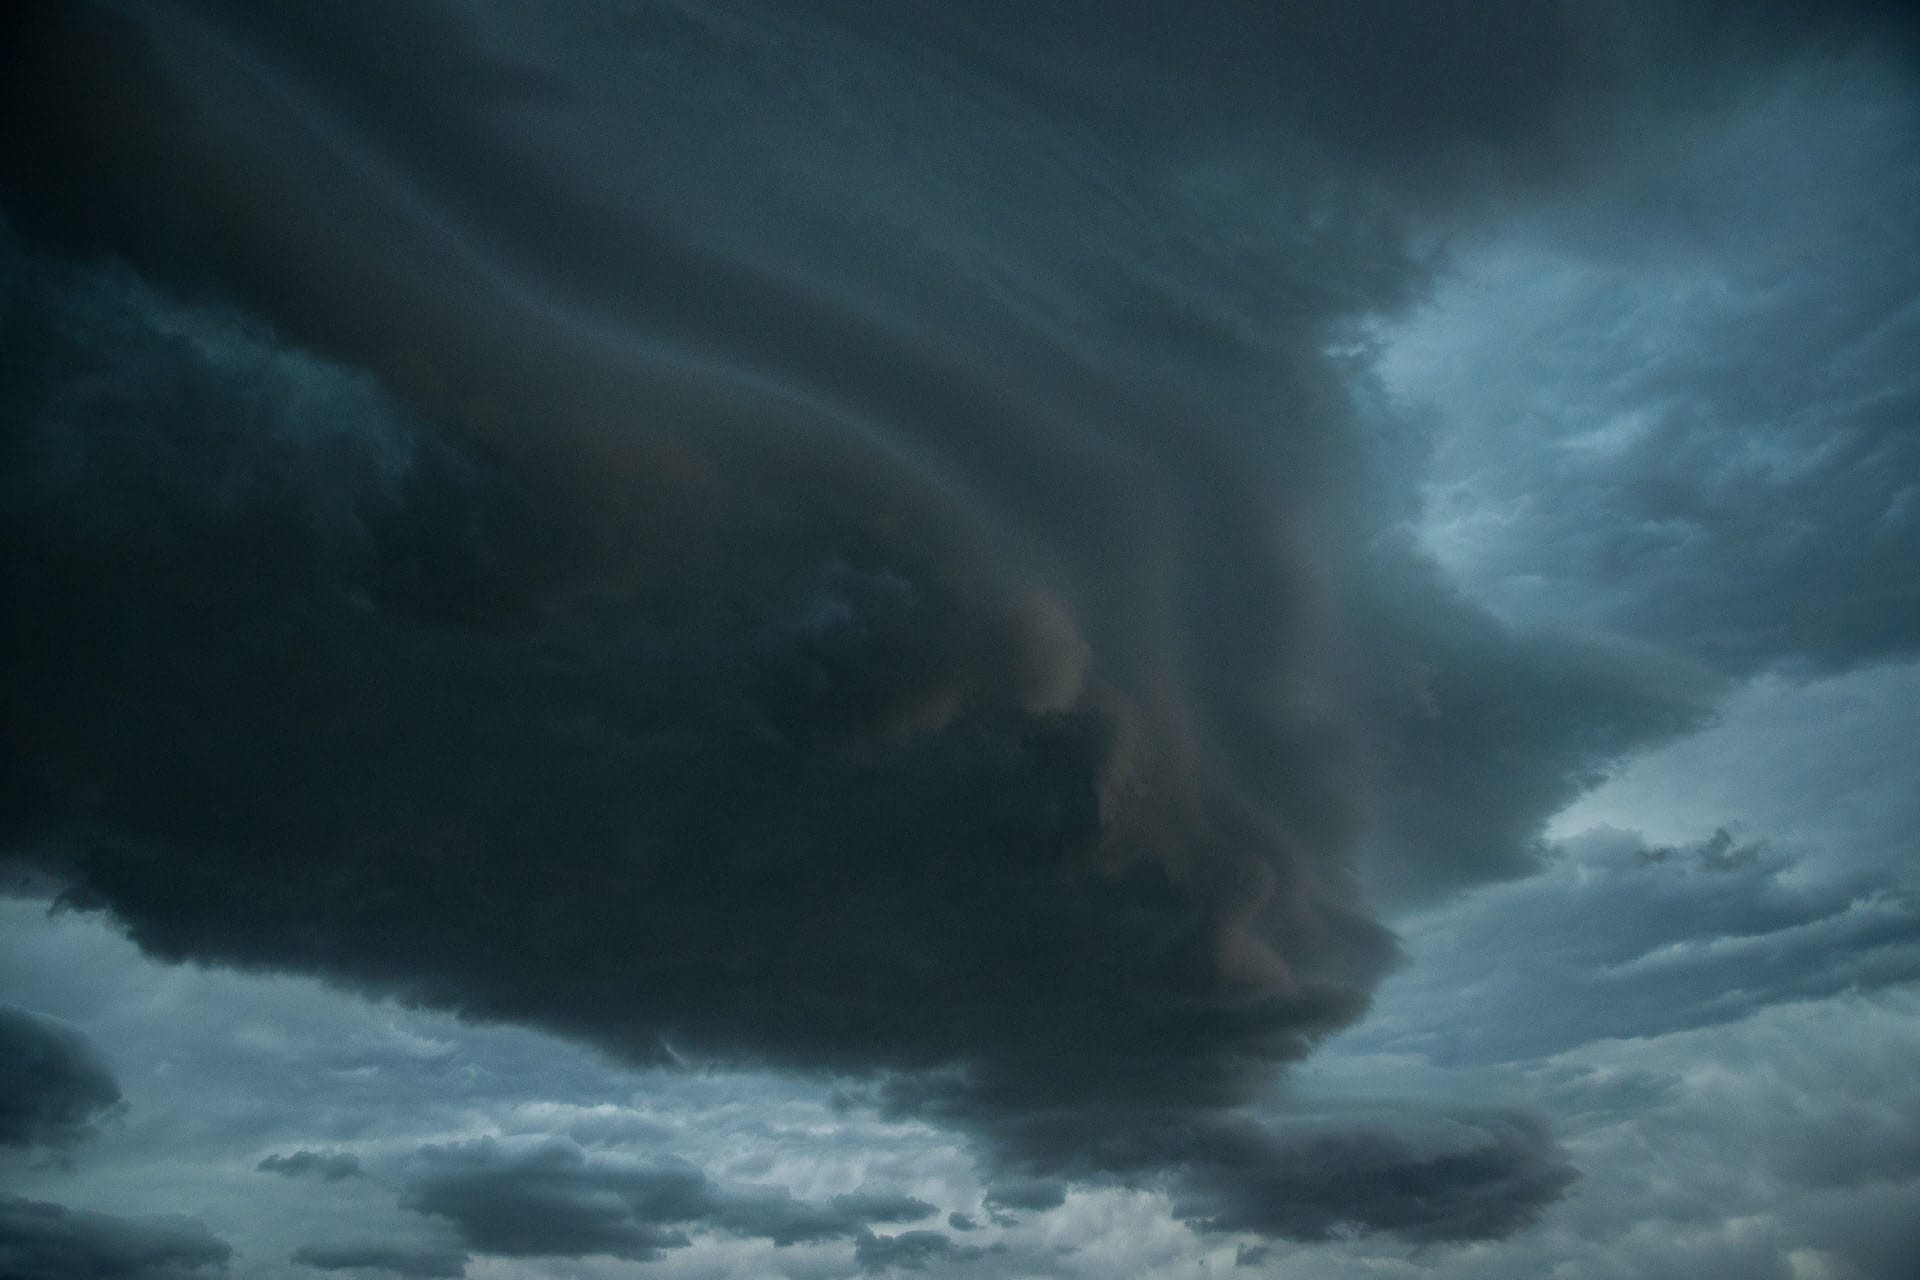 A wide, dark sky filled with funnel cloud producing supercells